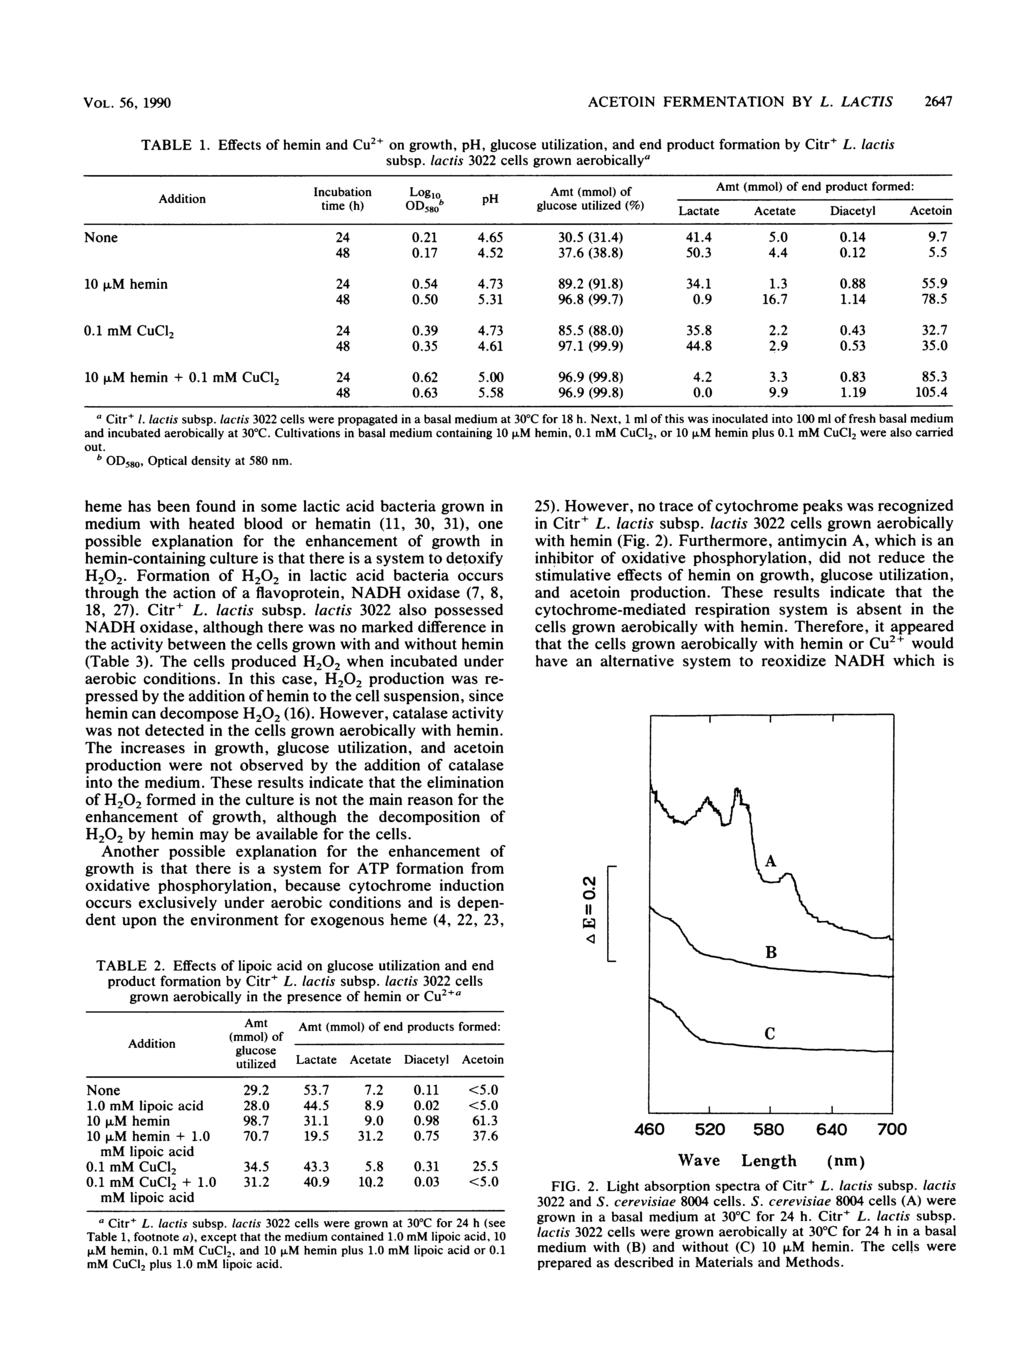 VOL. 56, 199 ACETOIN FERMENTATION BY L. LACTIS 2647 TABLE 1. Effects of hemin and Cu2" on growth, ph, glucose utilization, and end product formation by Citr+ L. lactis subsp.